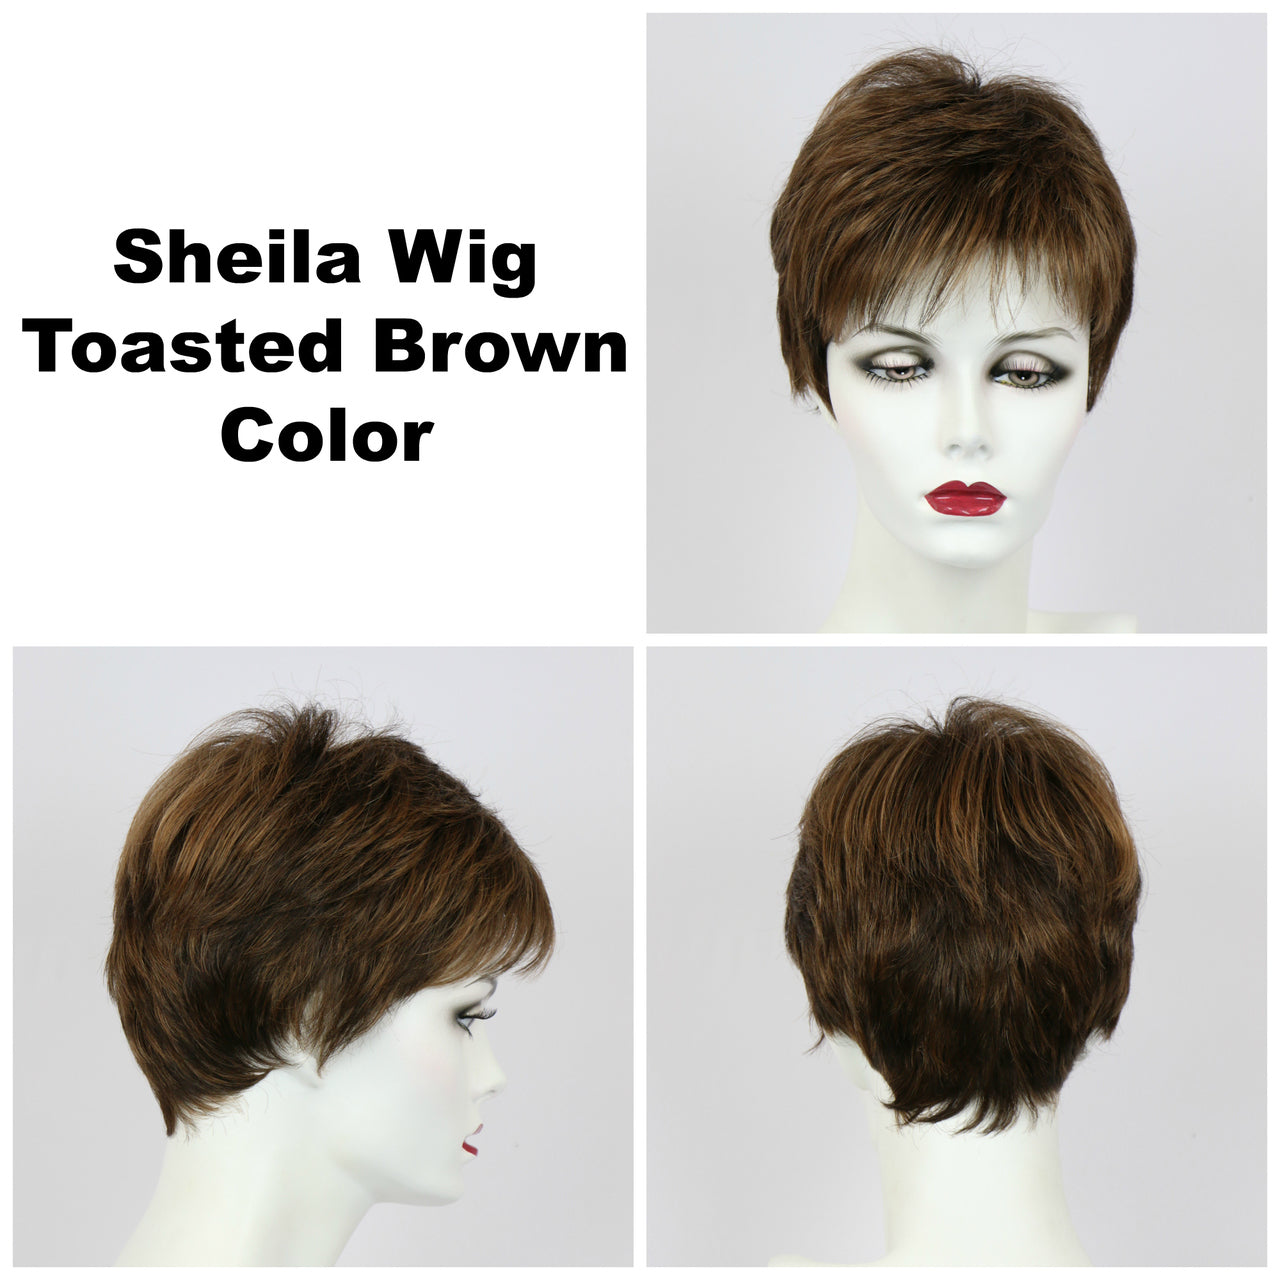 Toasted Brown / Petite Sheila / Short Wig